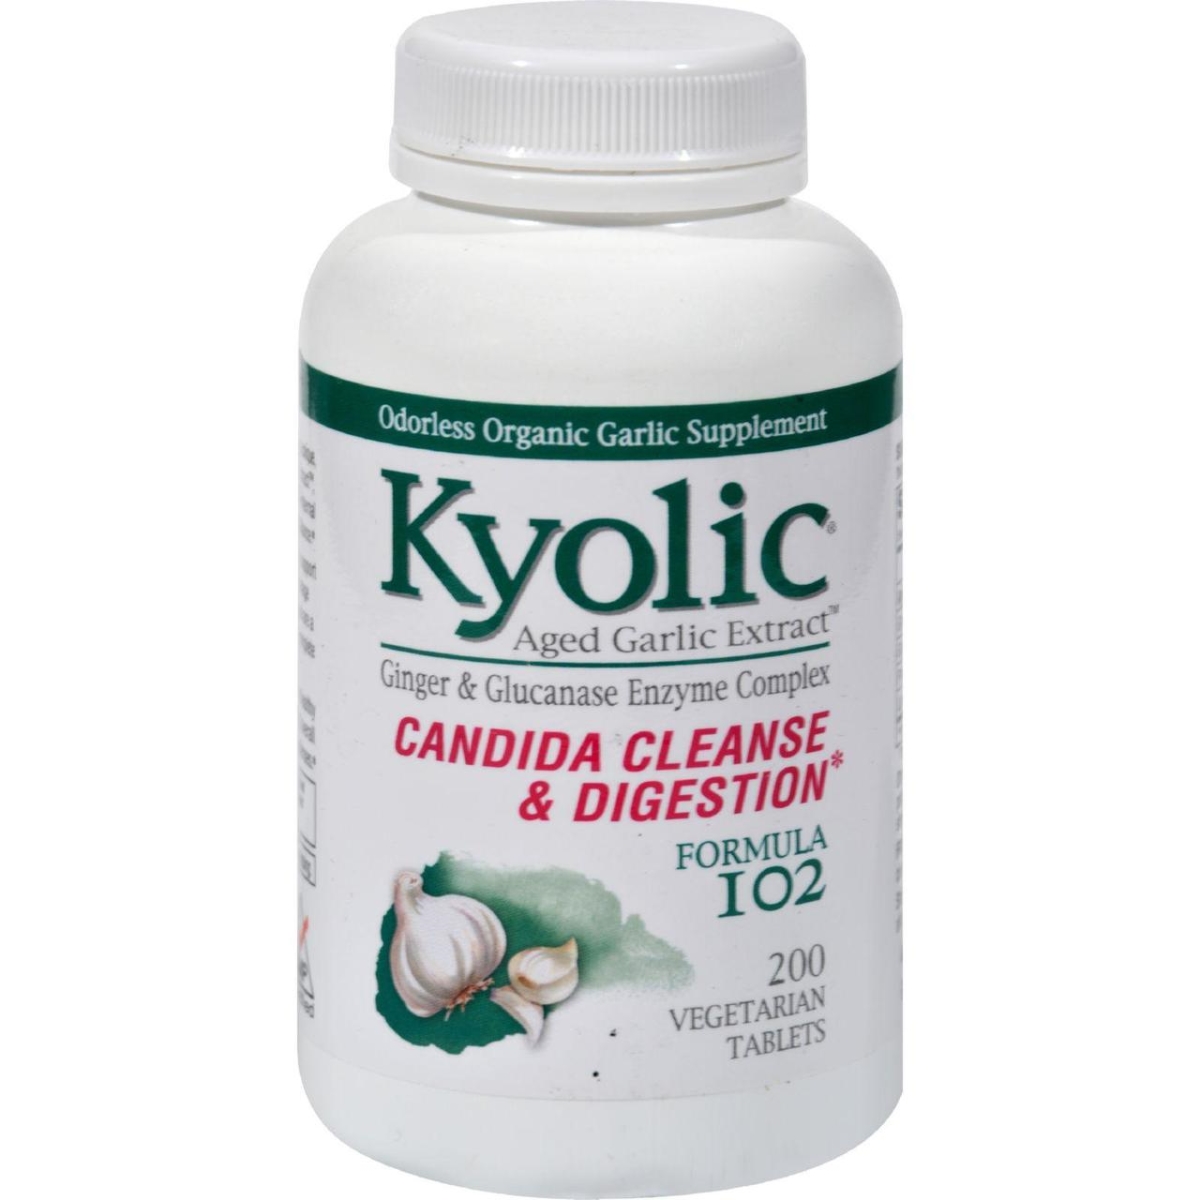 Hg0238543 Aged Garlic Extract Candida Cleanse & Digestion Formula 102, 200 Vegetarian Tablets